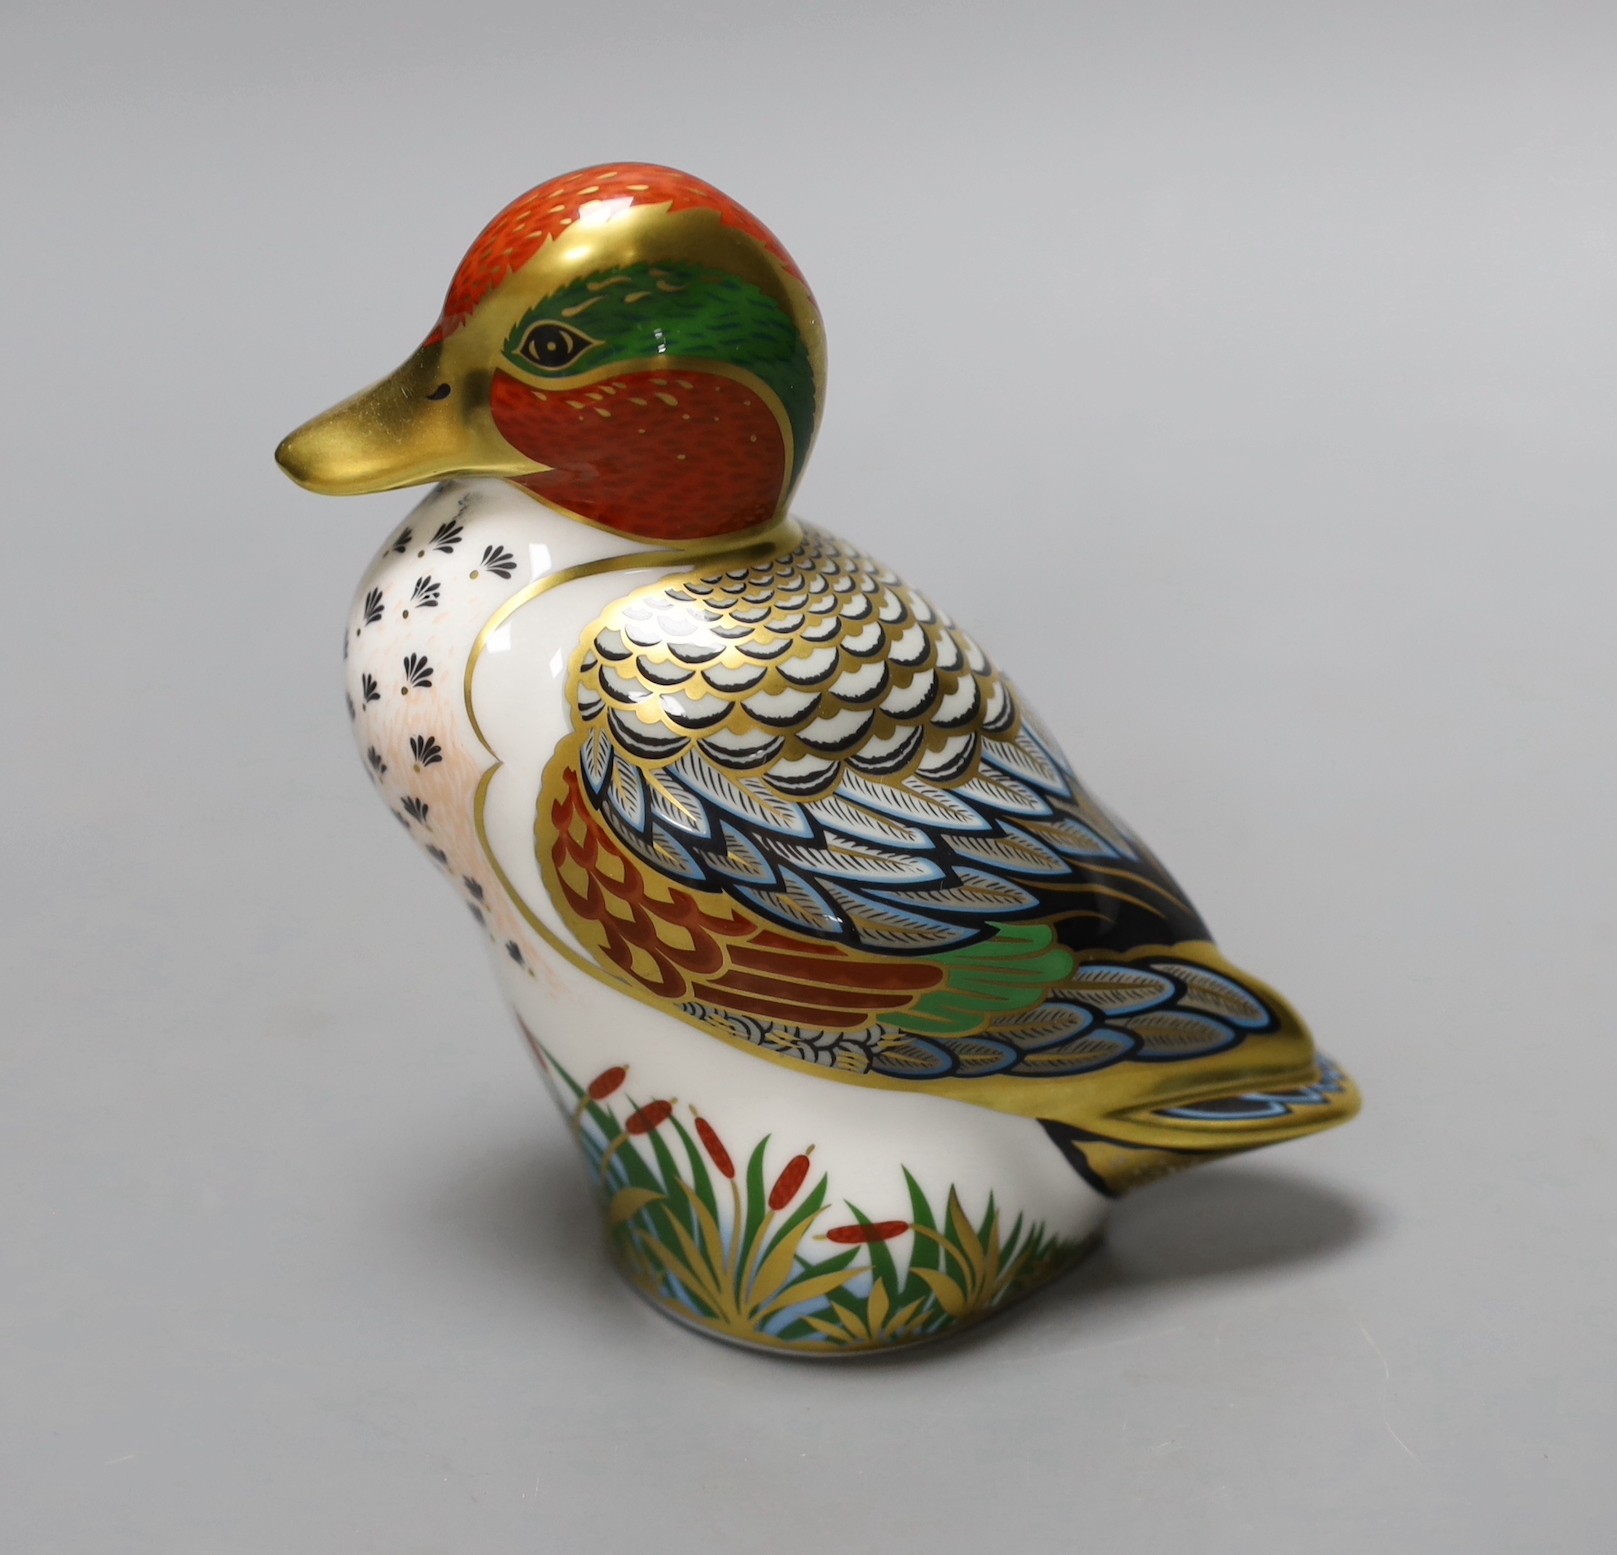 A Royal Crown Derby paperweight - Green Winged Teal, gold stopper, boxed, no certificate